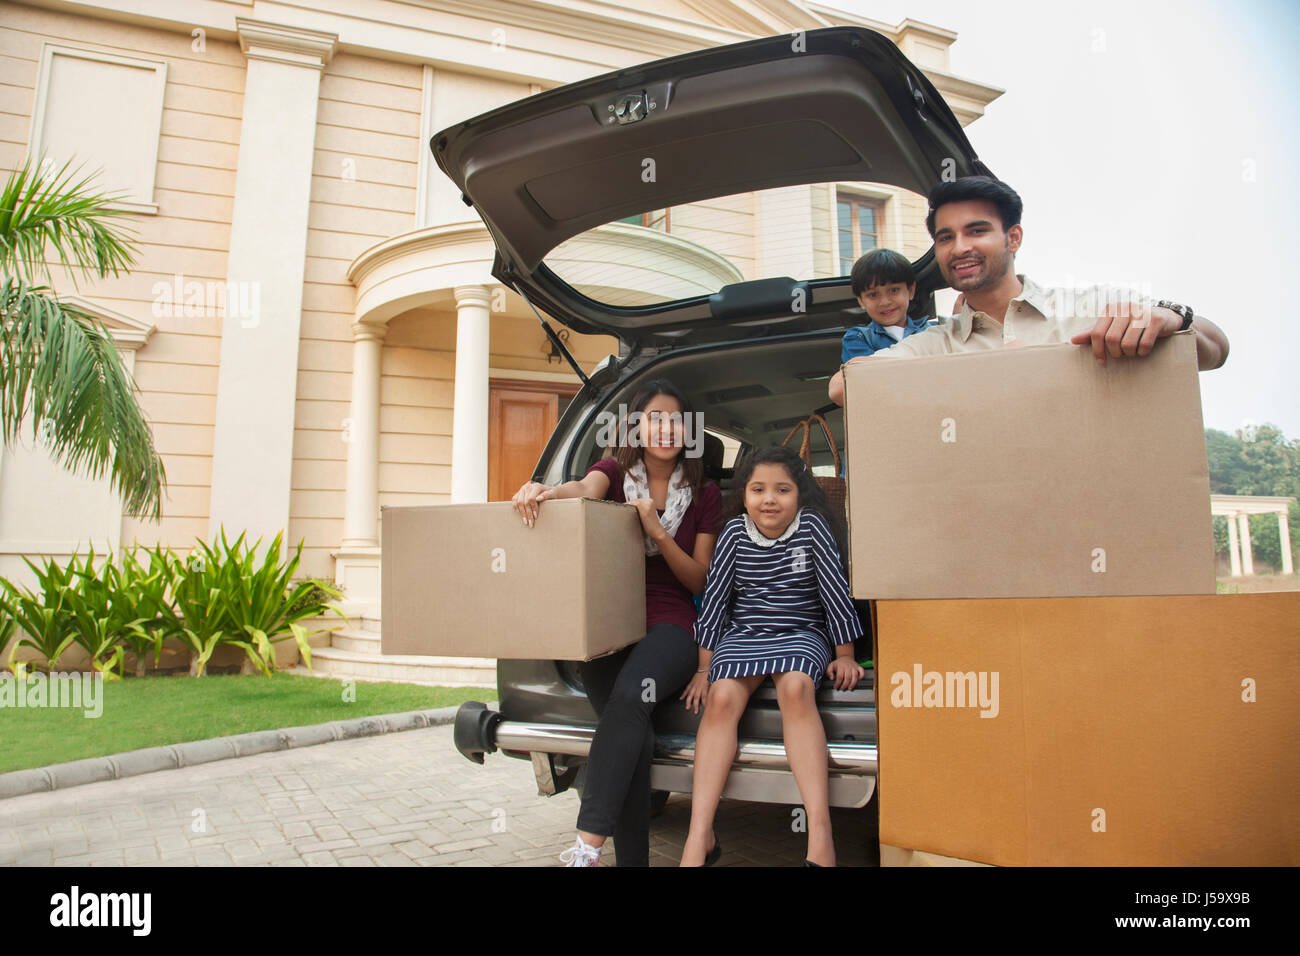 Family unpacking cardboard boxes from car Stock Photo